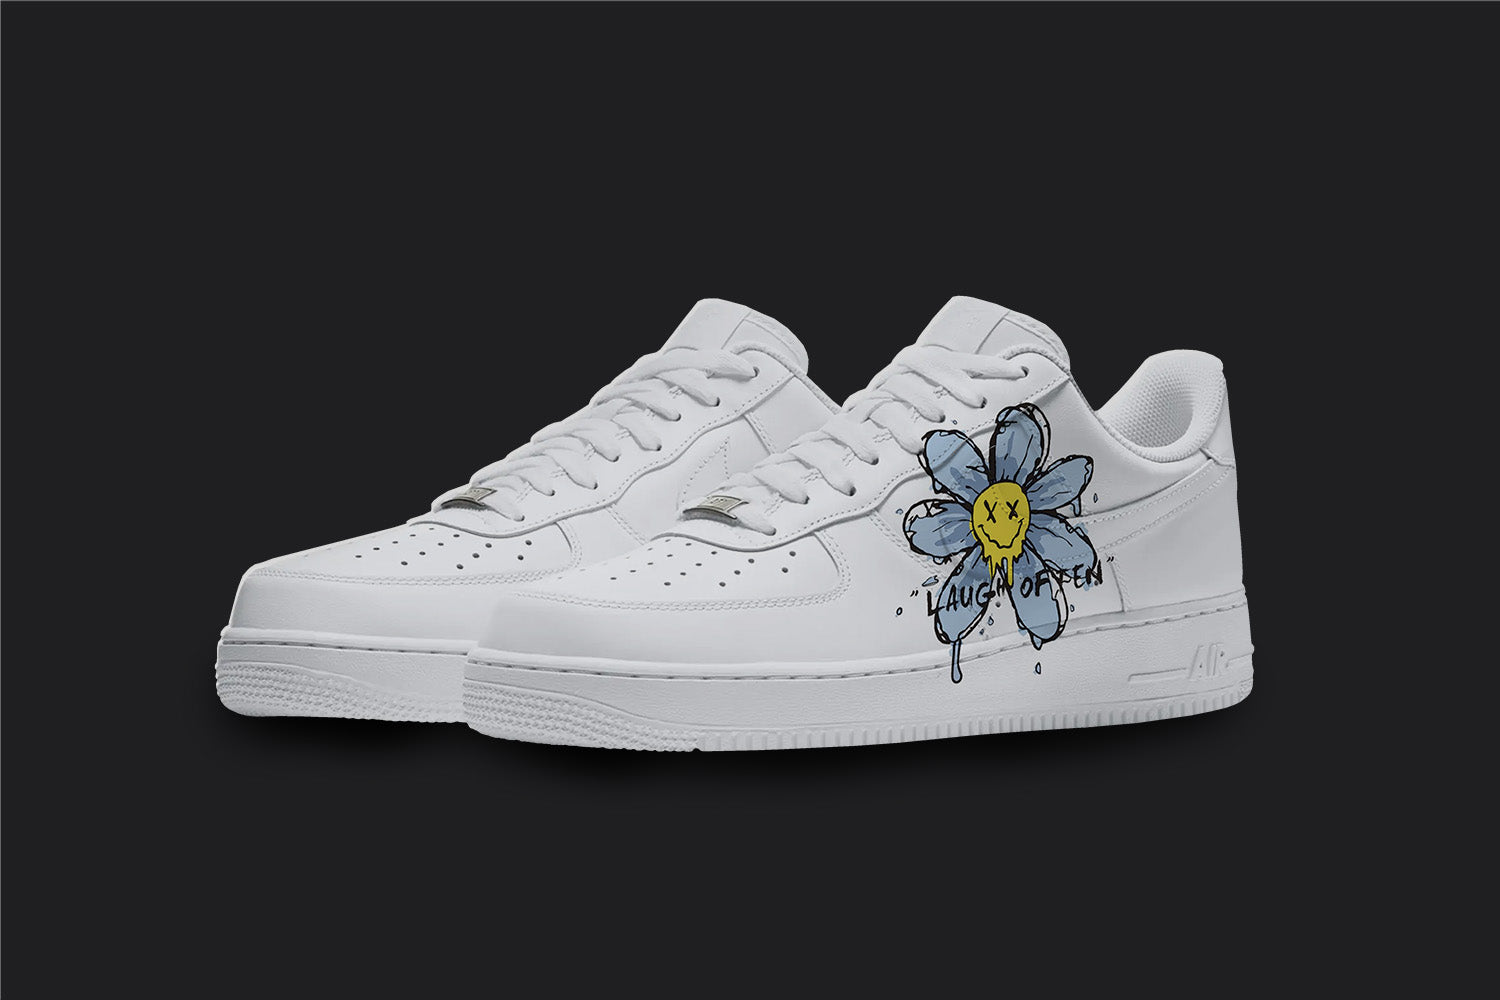 The image is of a Custom Nike Air force 1 sneaker pair on a blank black background. The white custom sneakers have a light blue dripping flower design on the side of the shoes.